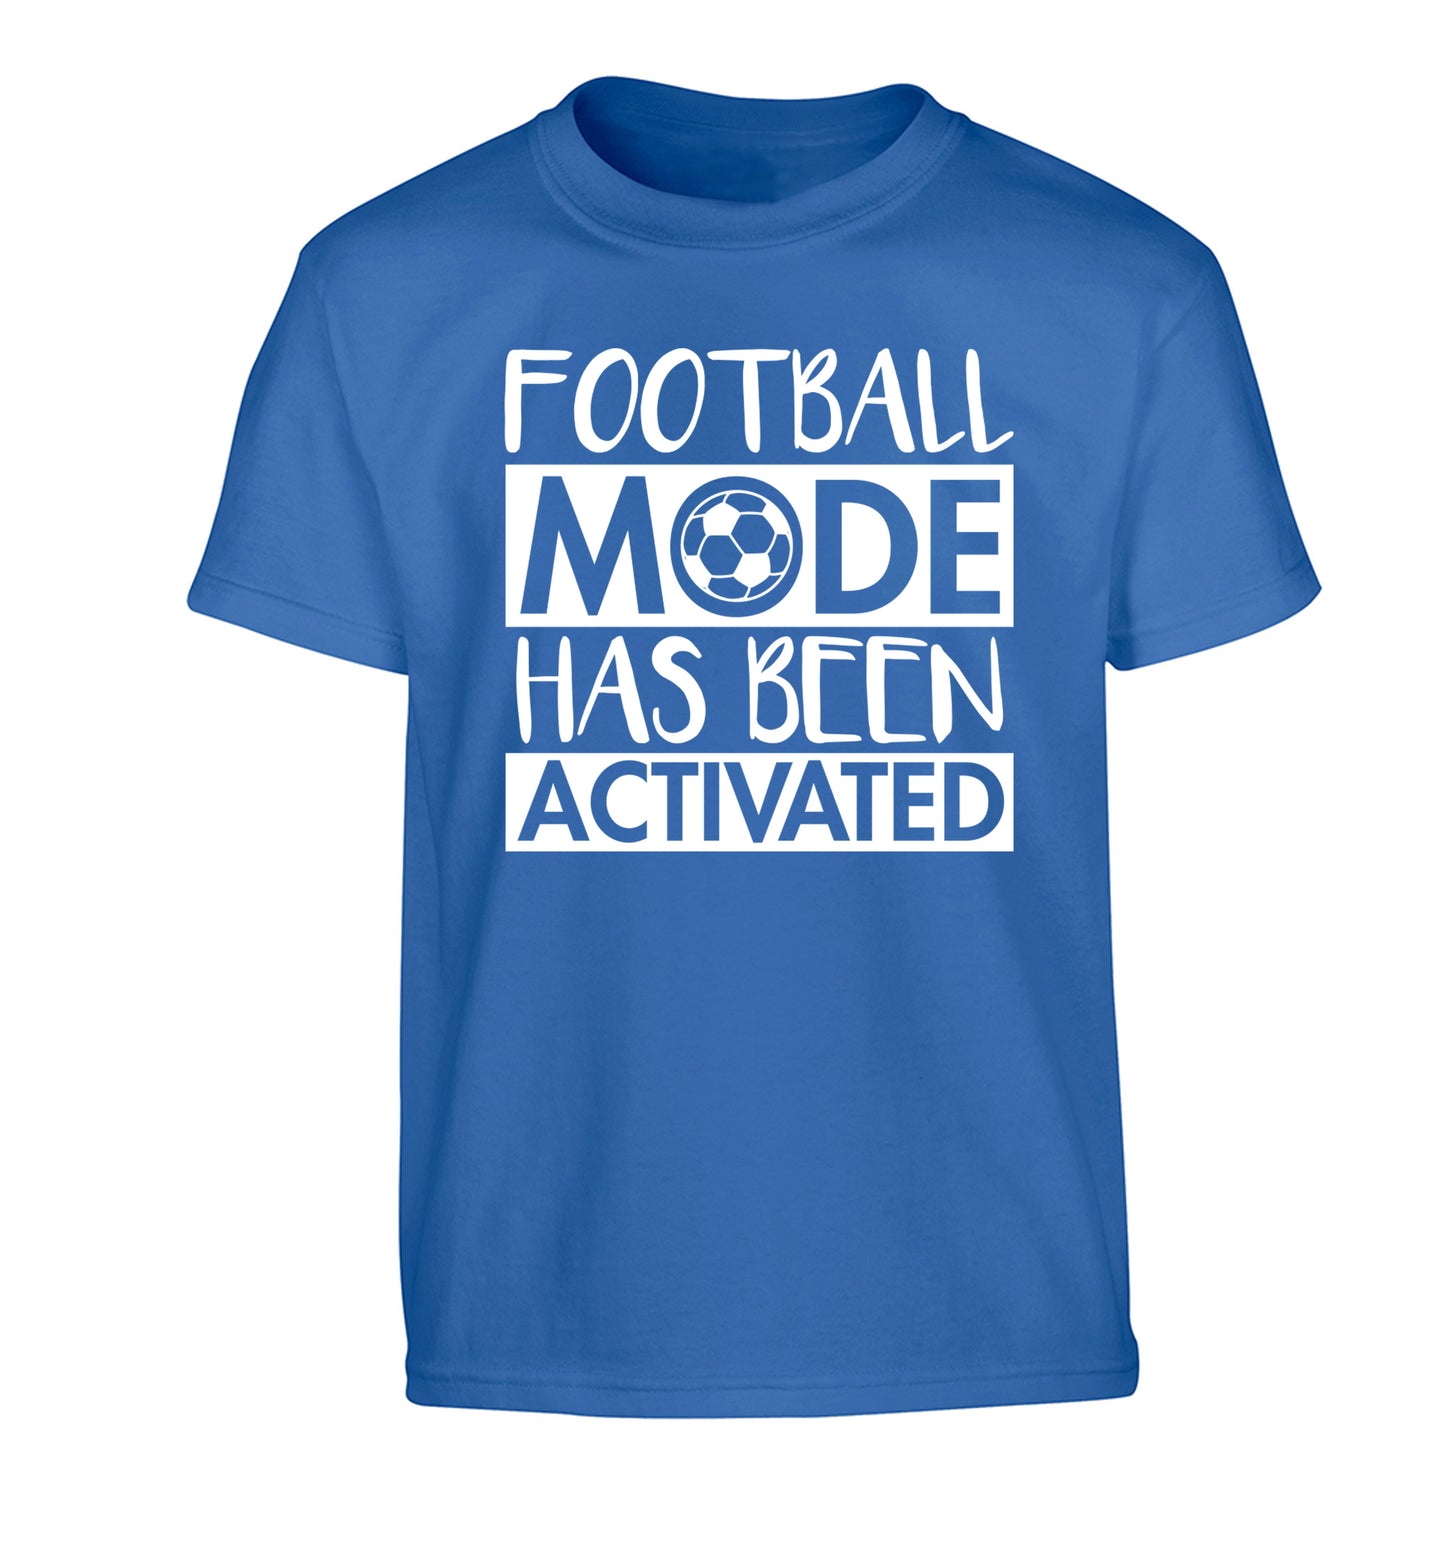 Football mode has been activated Children's blue Tshirt 12-14 Years